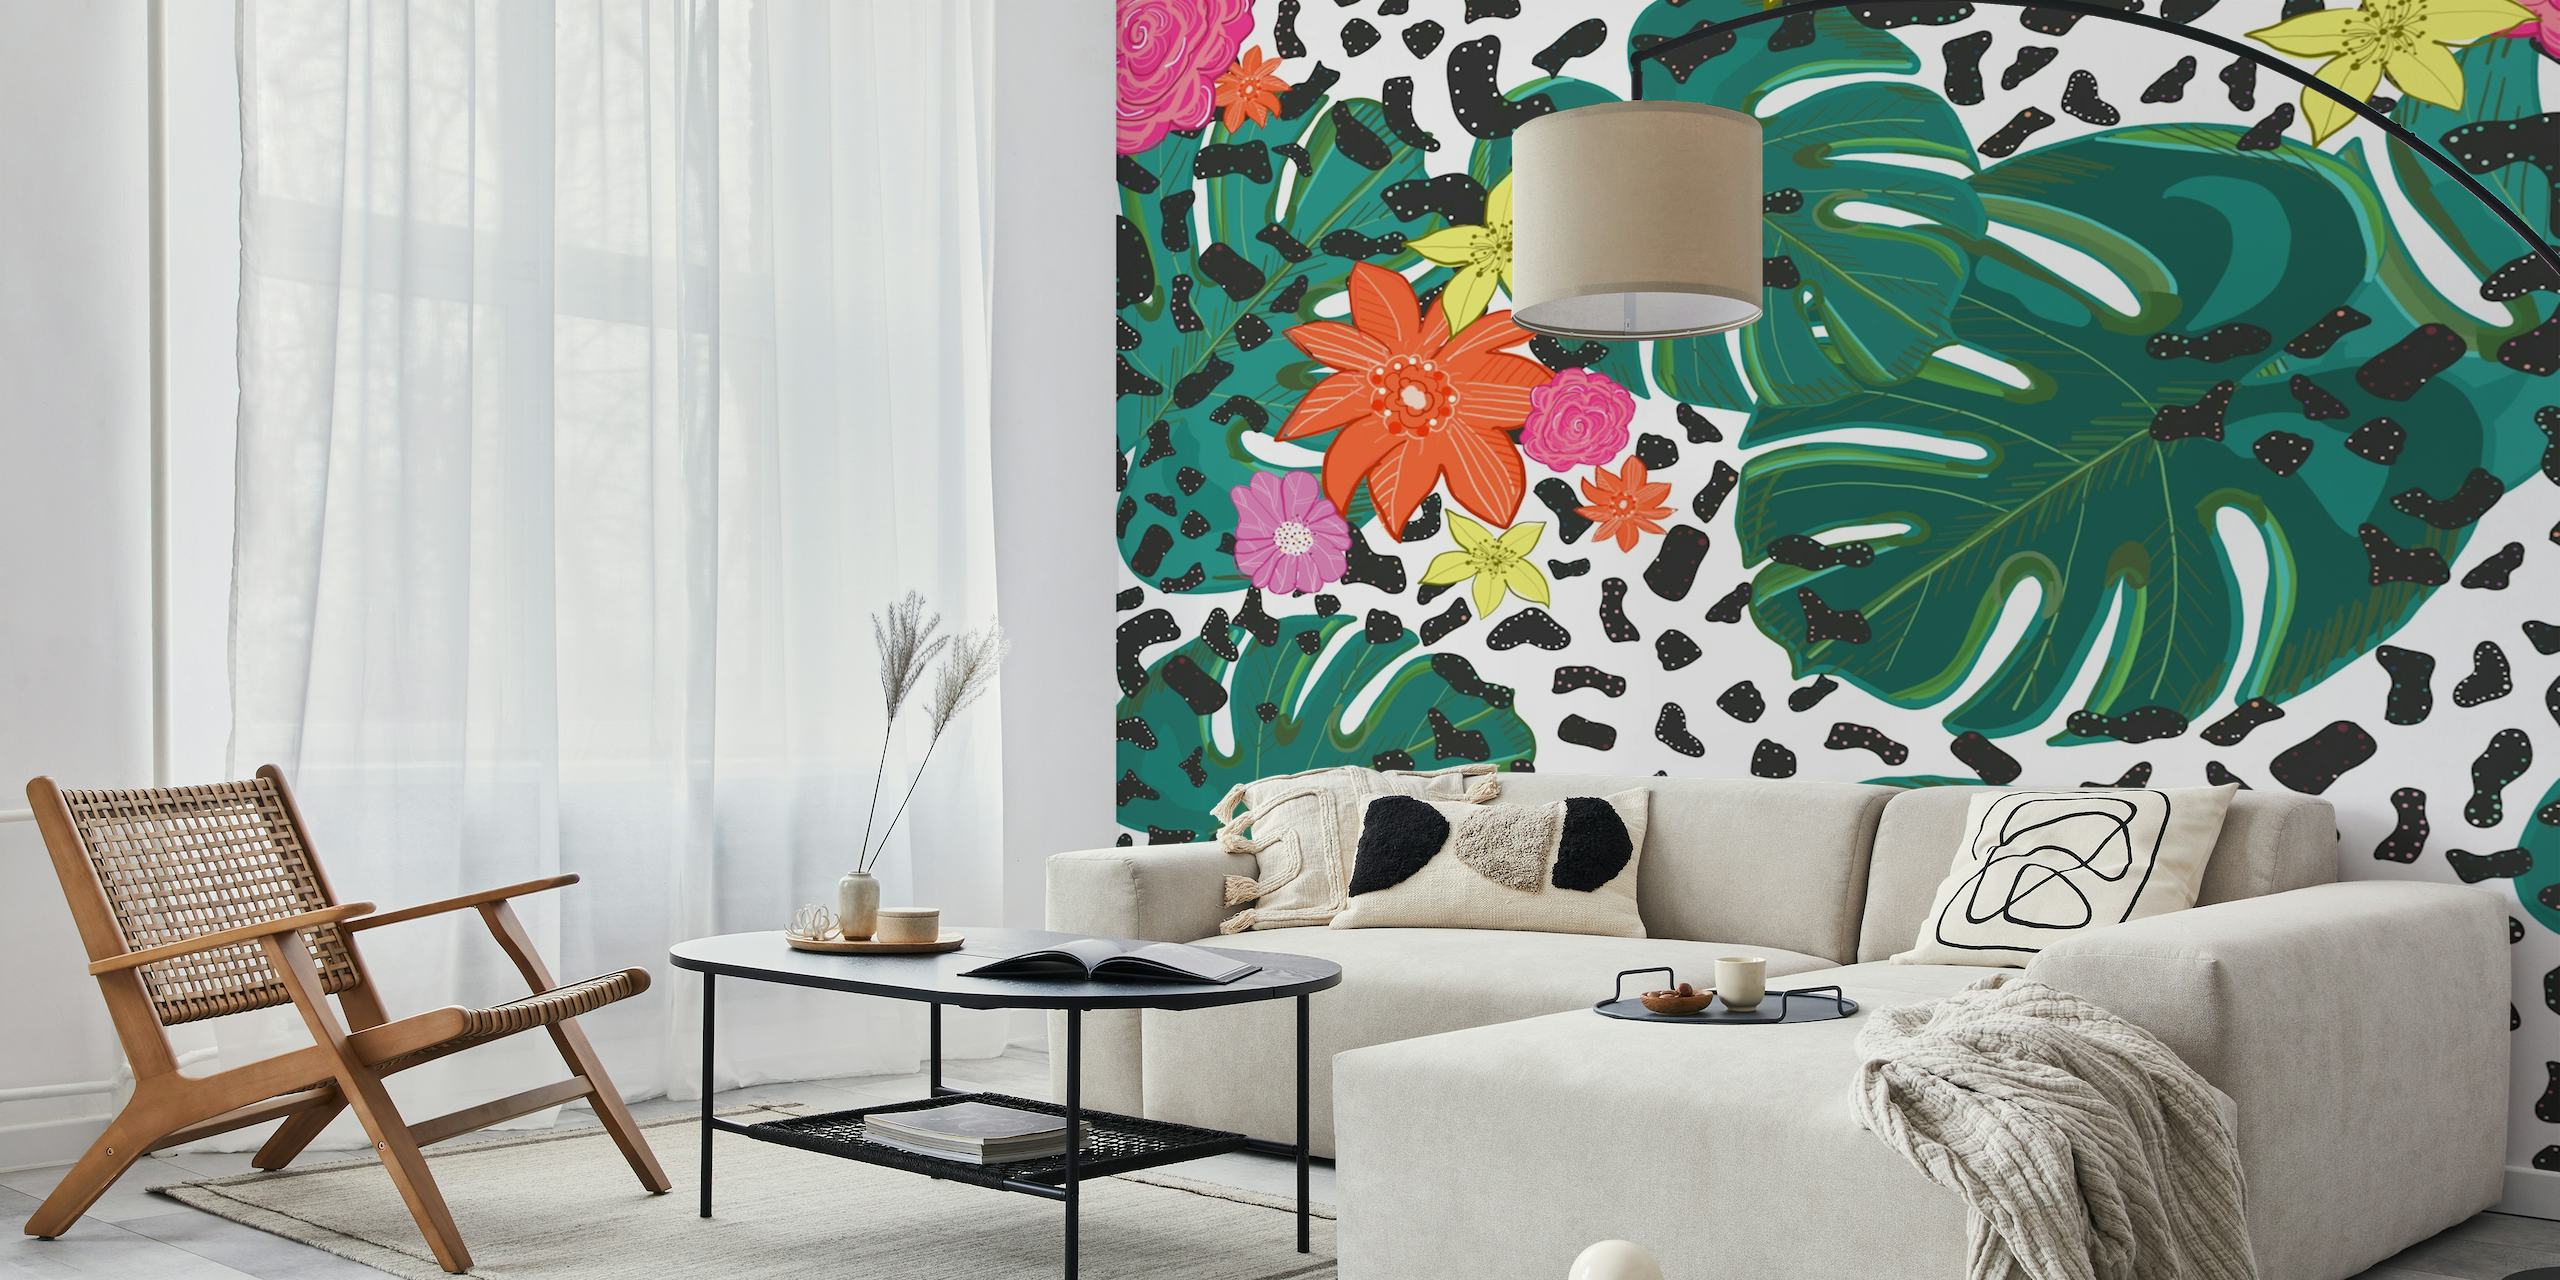 Colorful tropical wall mural with monstera leaves, bright flowers, and leopard spots